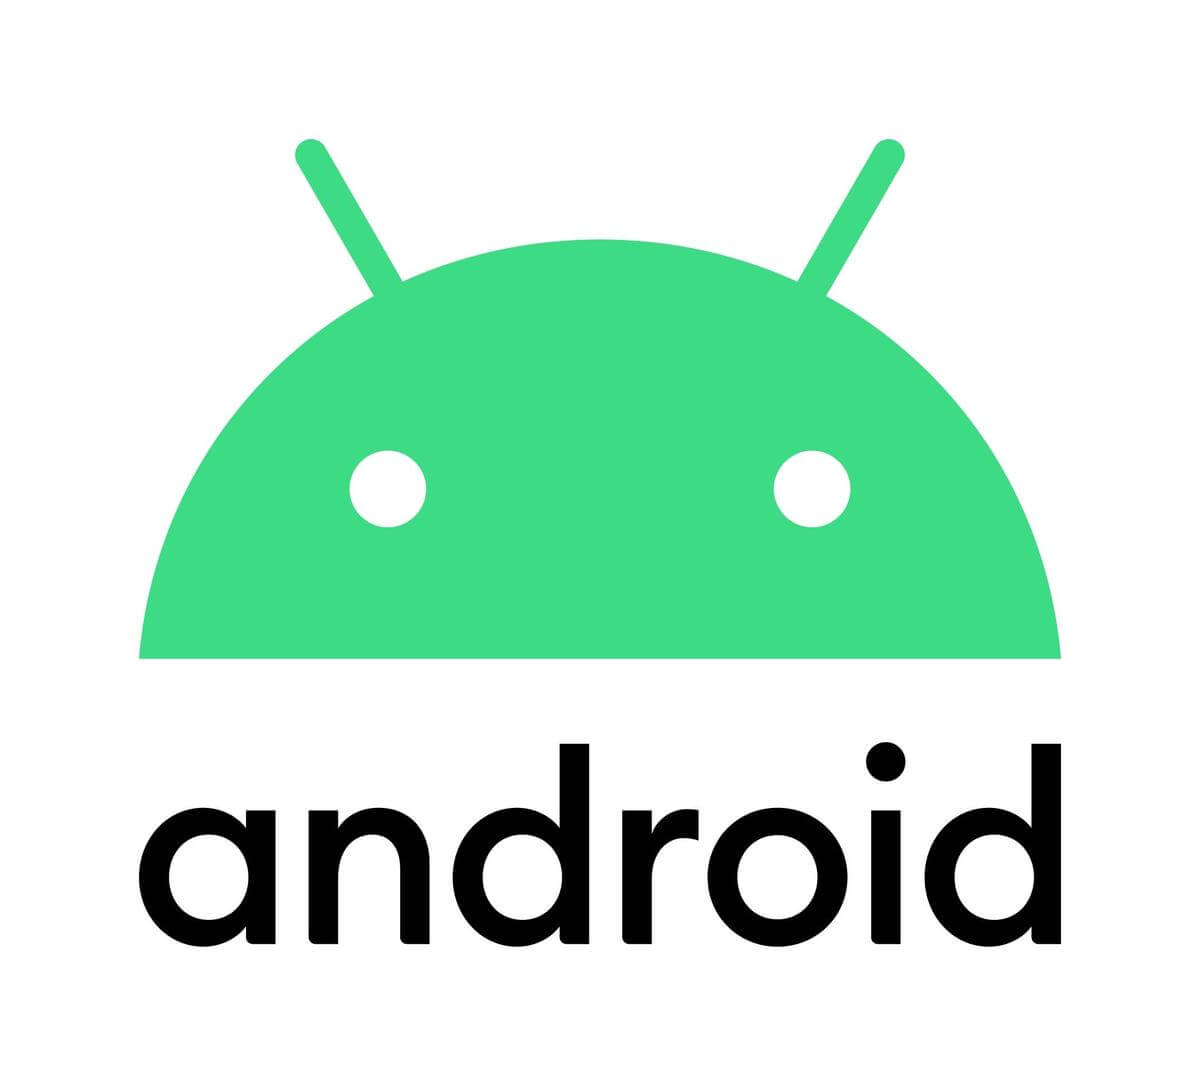 Android Versions List